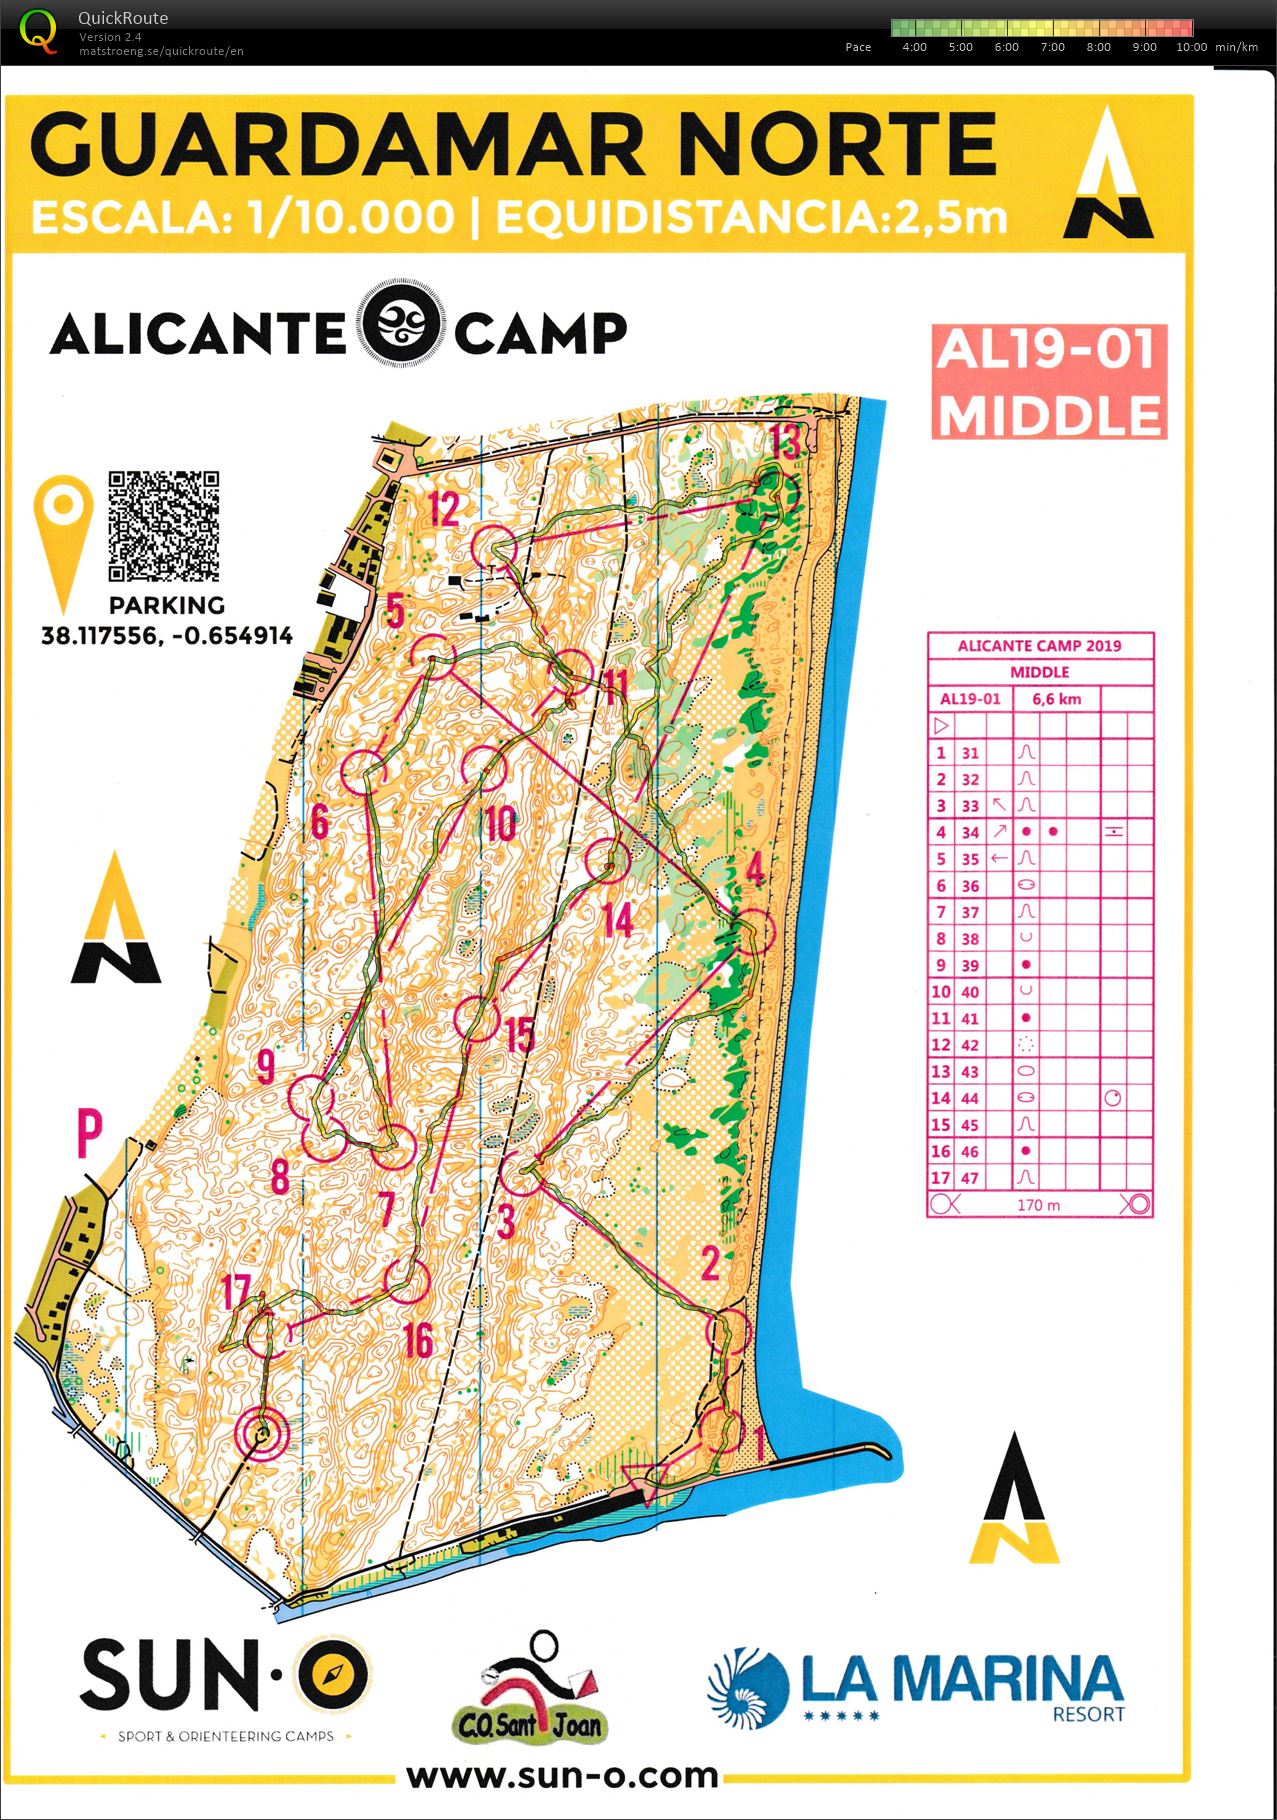 TC Alicante #7, middle rychle (2019-01-23)